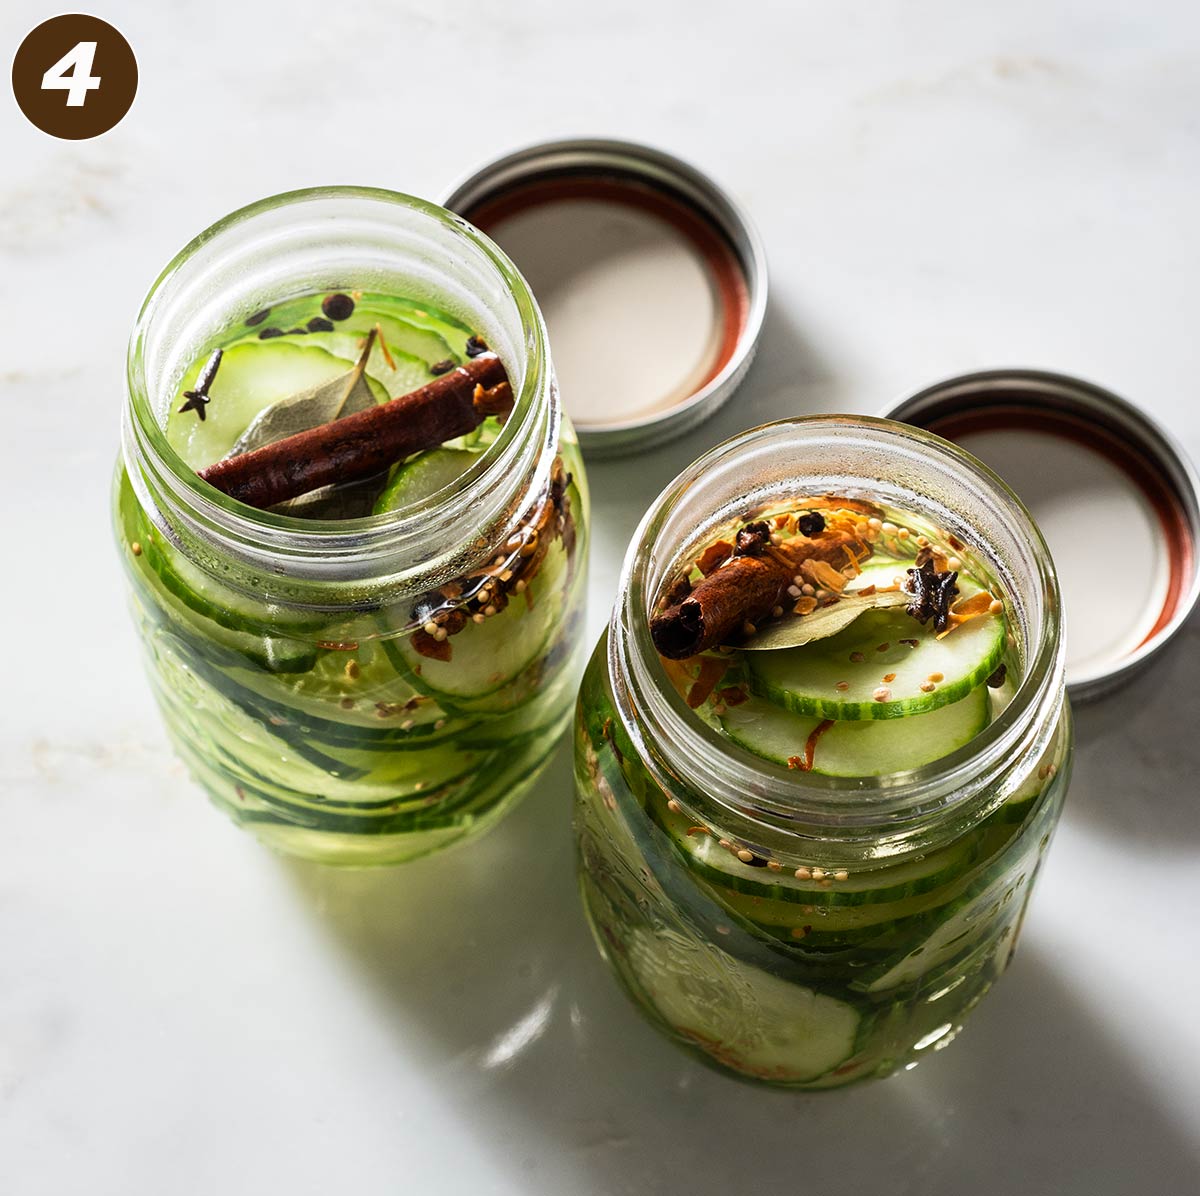 Two jars with spiced sweet pickles.